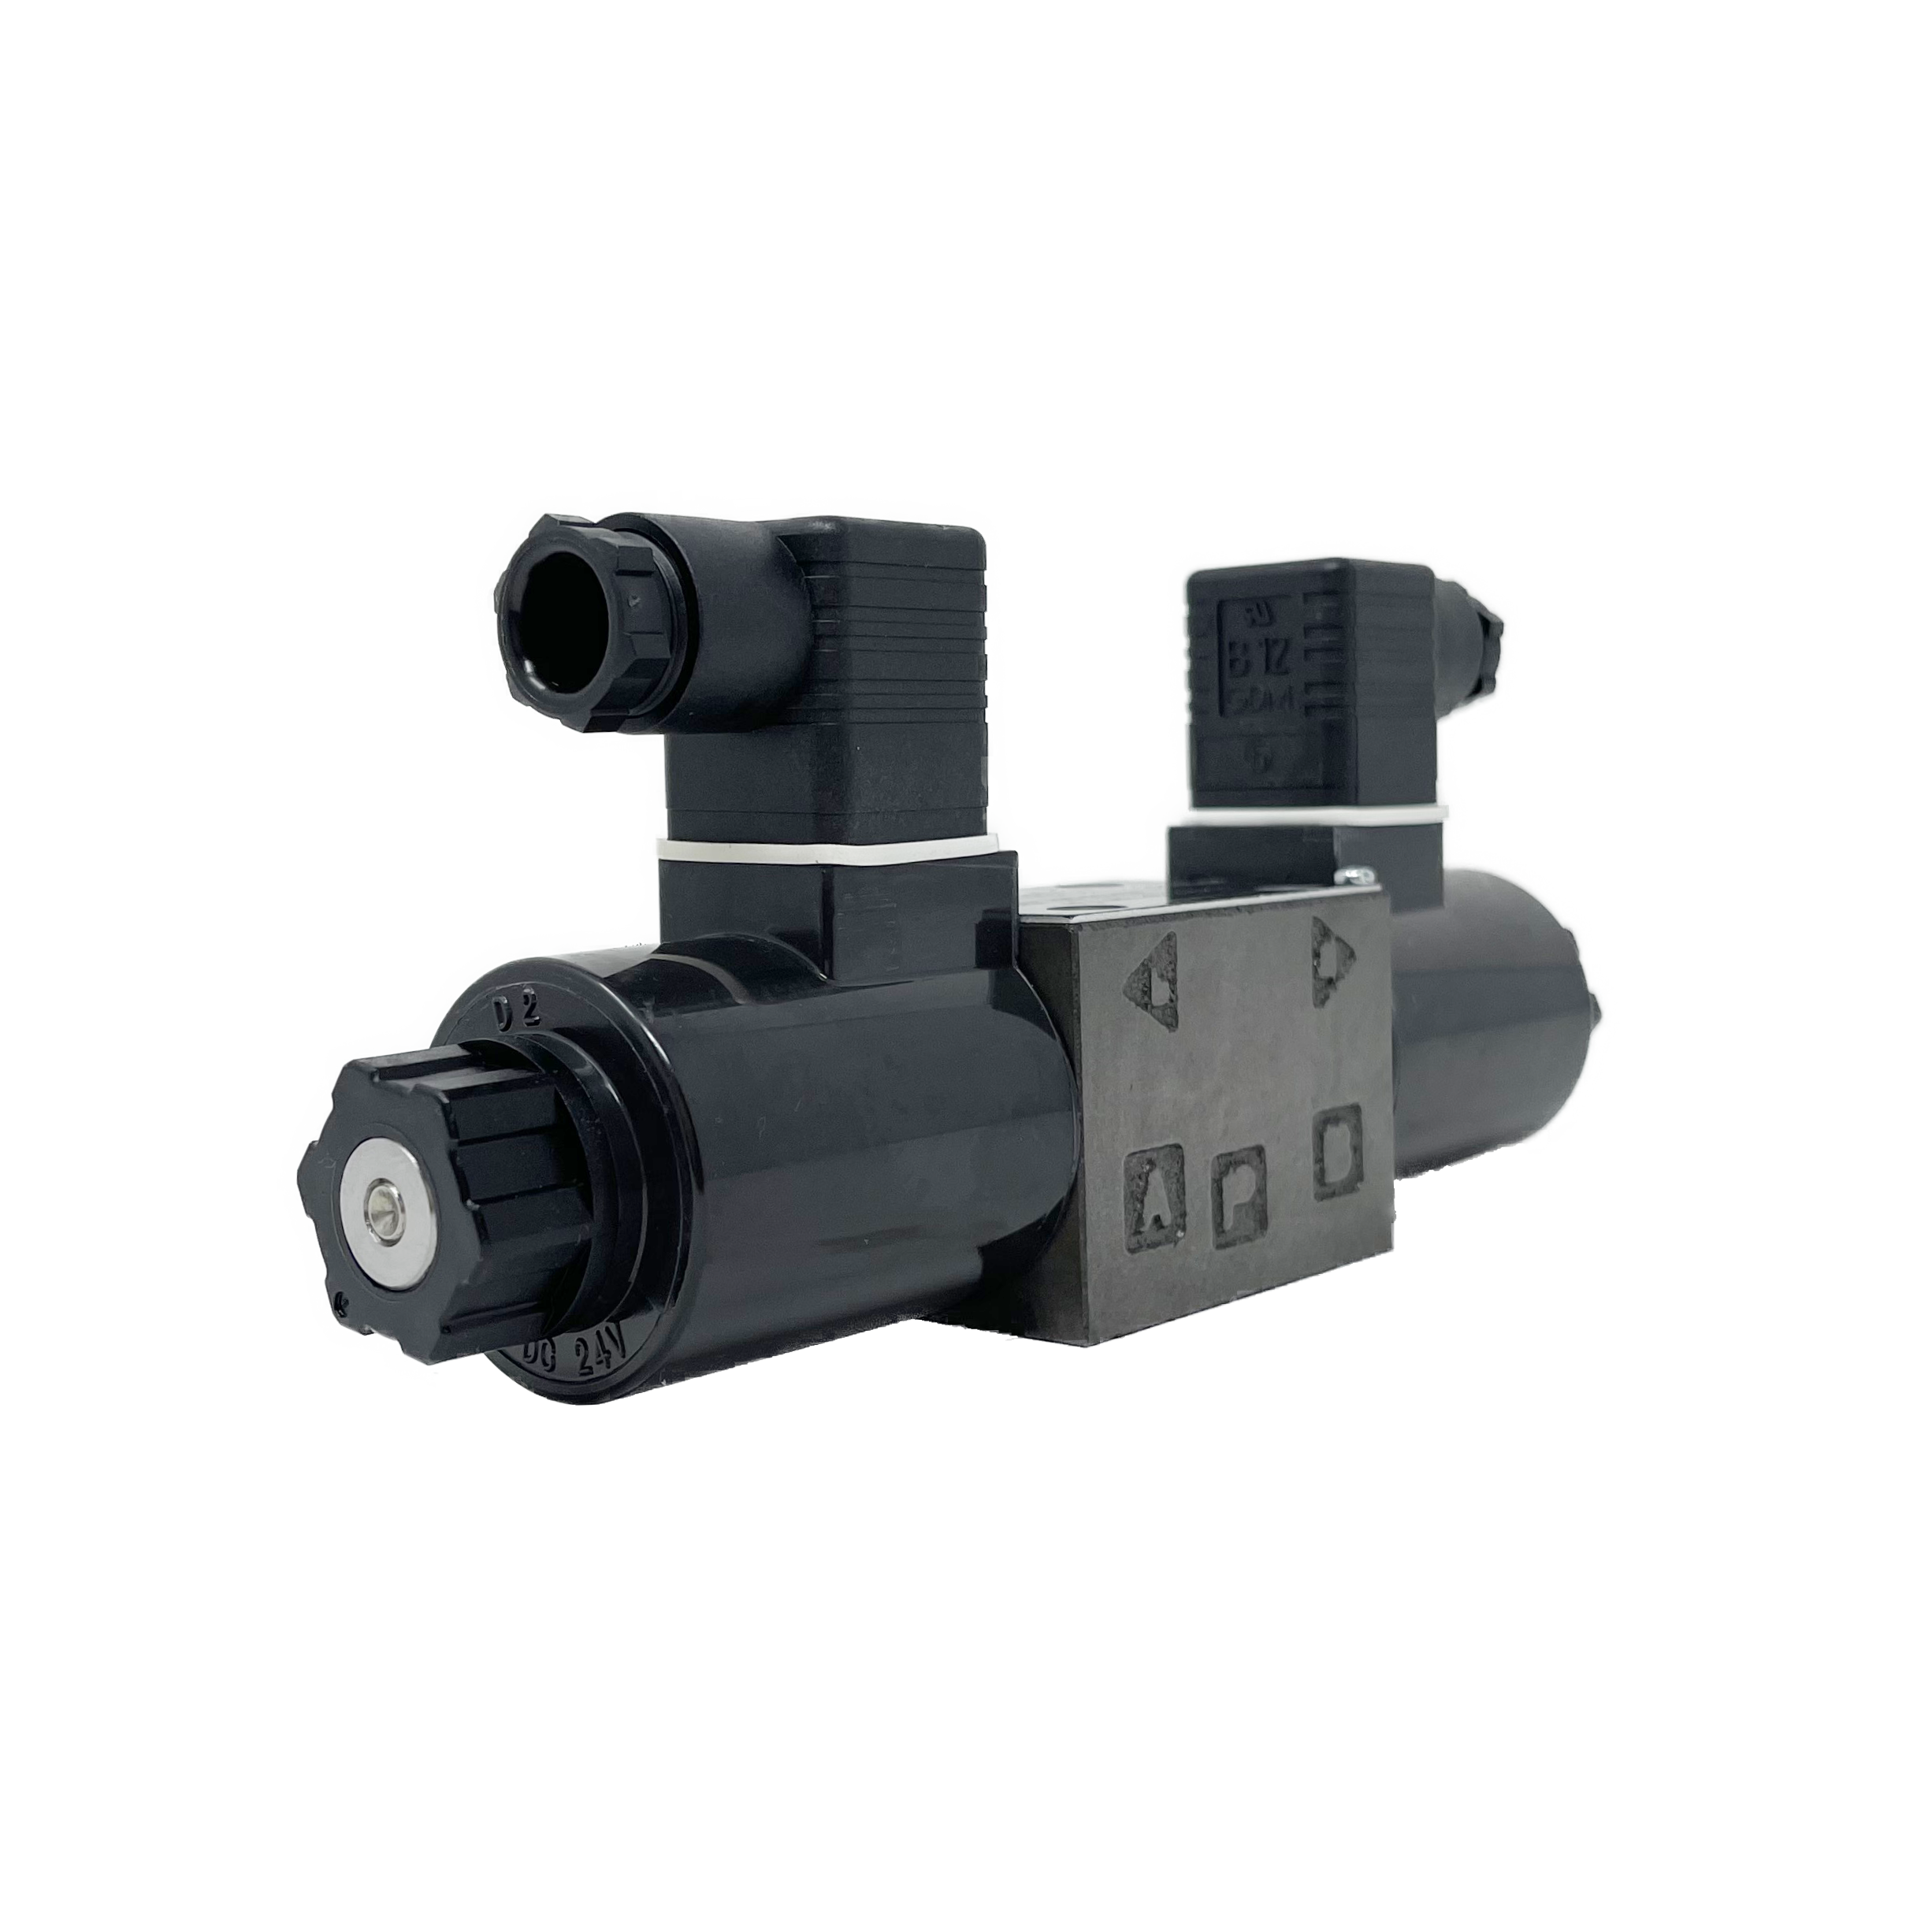 SA-G01-C7Y-E115-E31 : Nachi Solenoid Valve, 3P4W, D03 (NG6), 13.2GPM, 5075psi, P to T with A & B Blocked in Neutral, 115 VAC, DIN